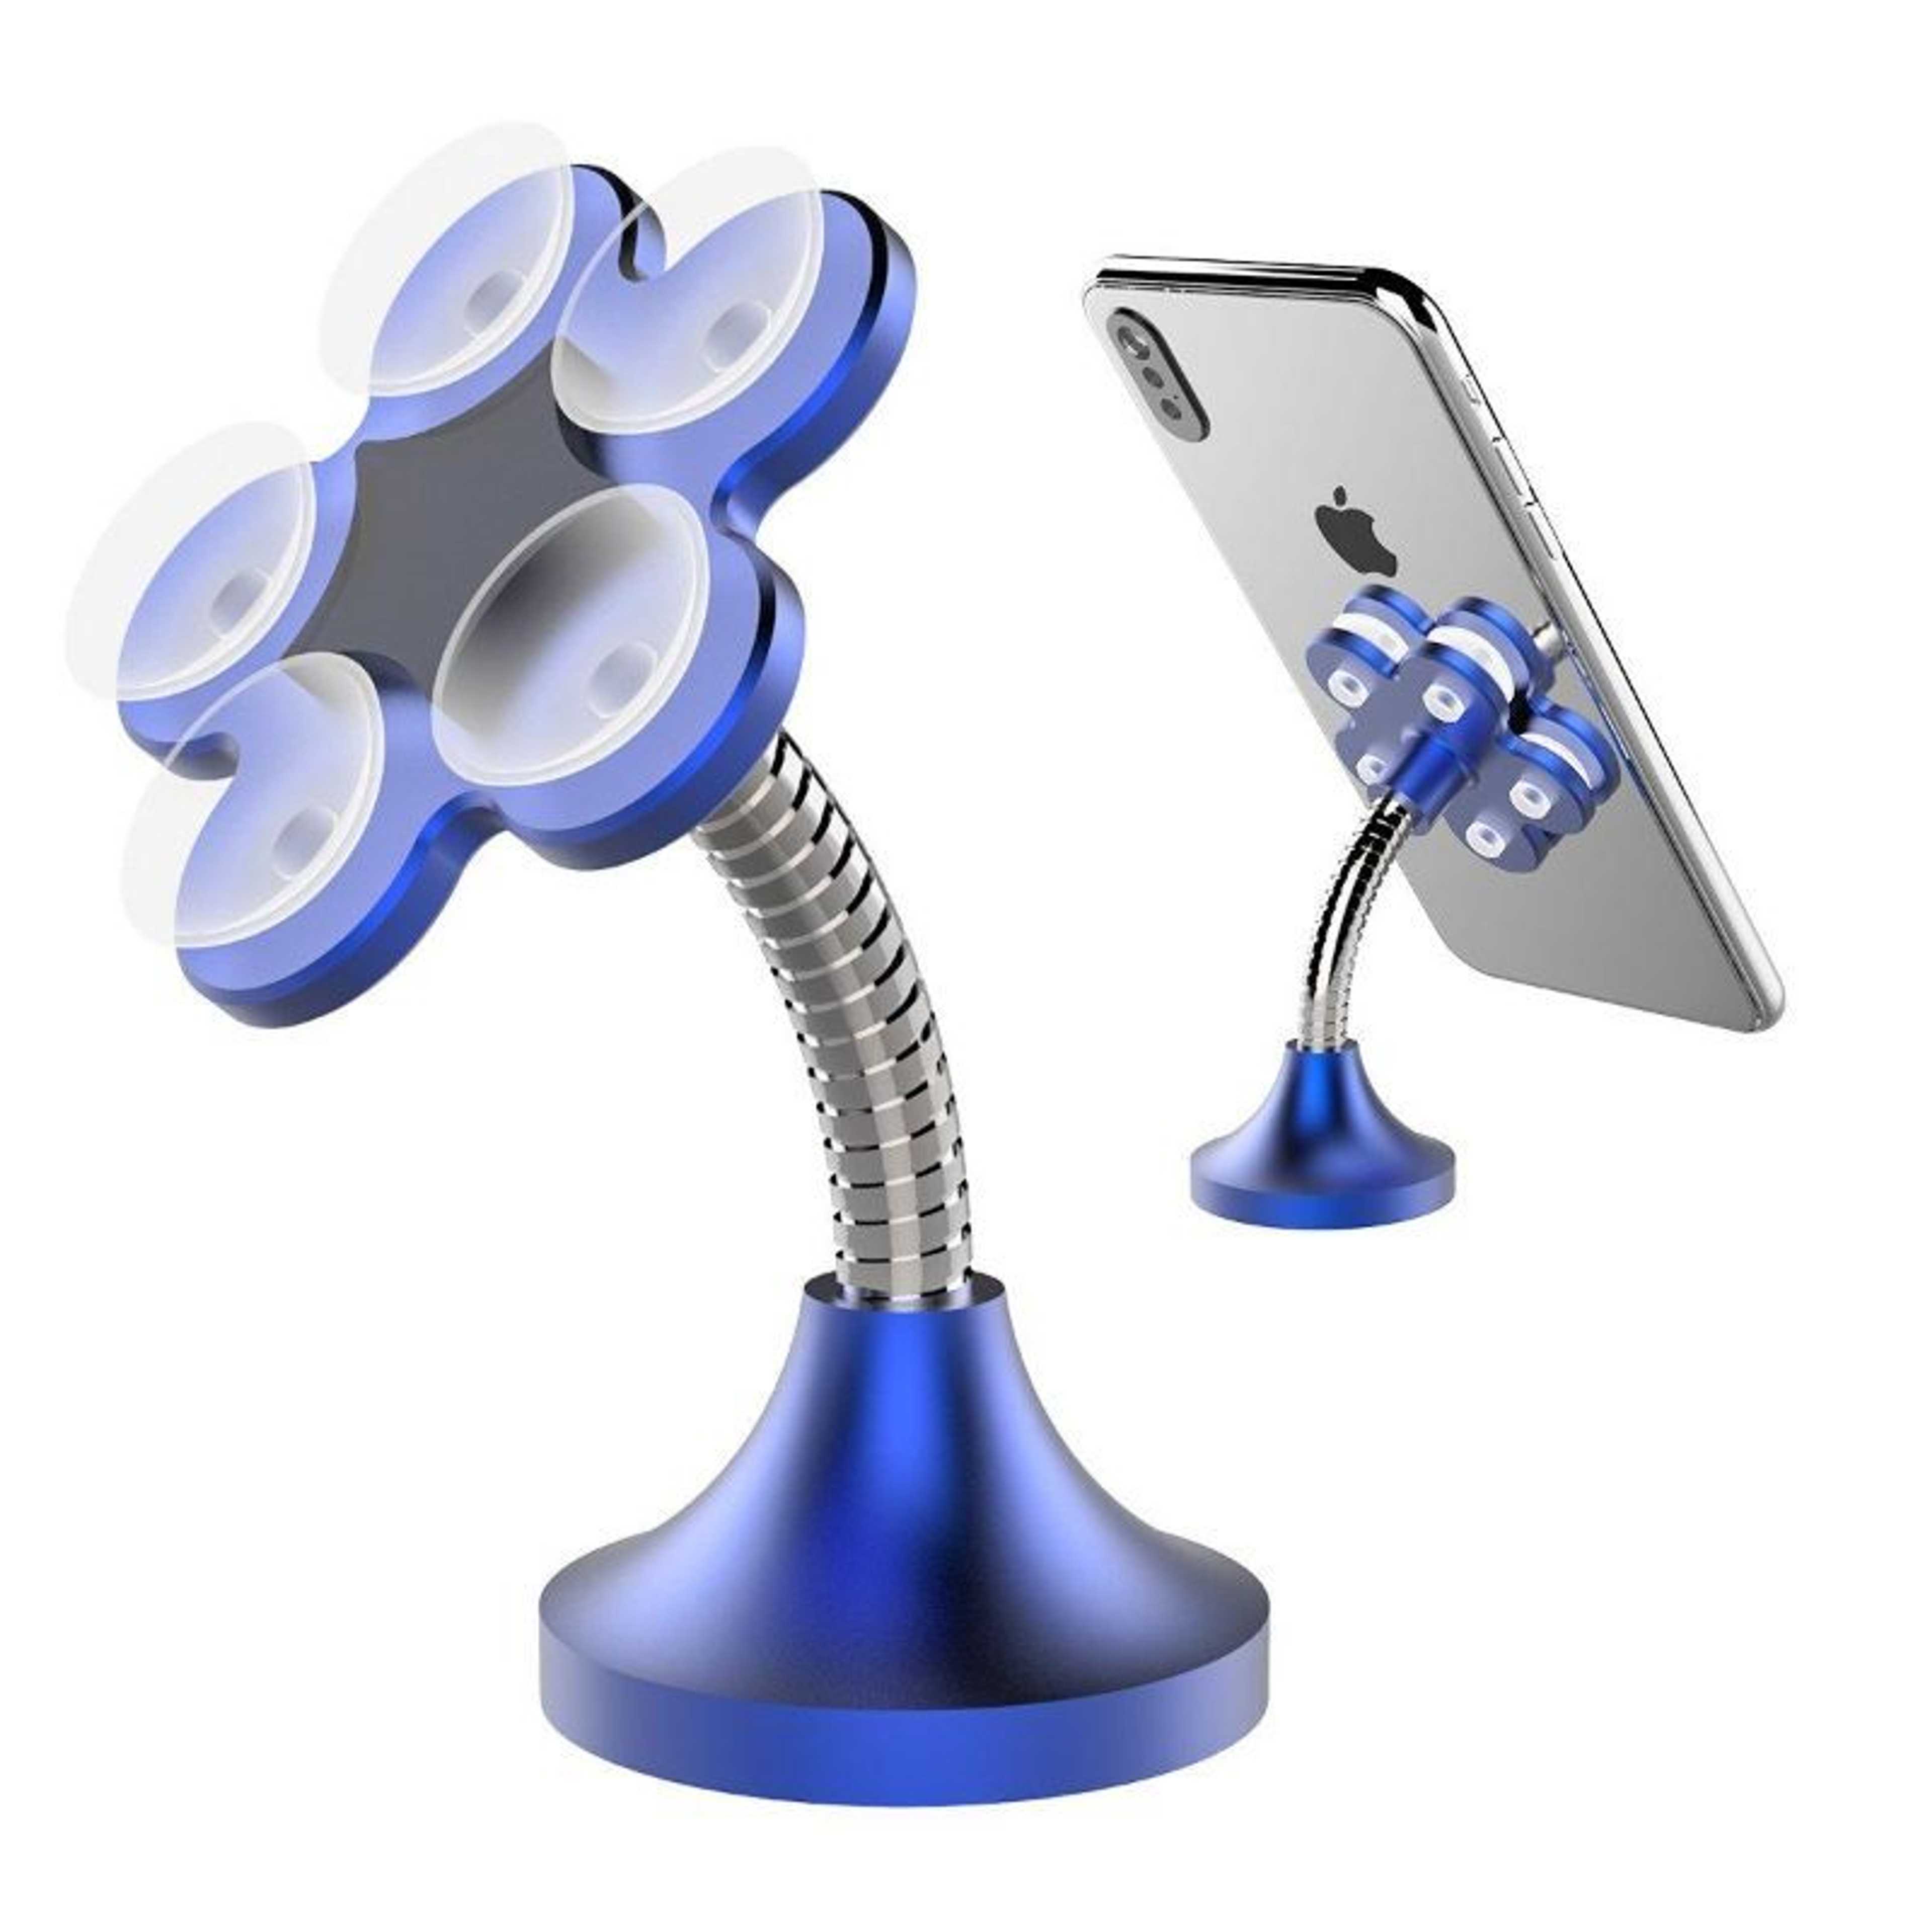 New Tik tok Mobile Holder Magic Stand,360 degree Rotation Double-Sided Suction Cup Mount